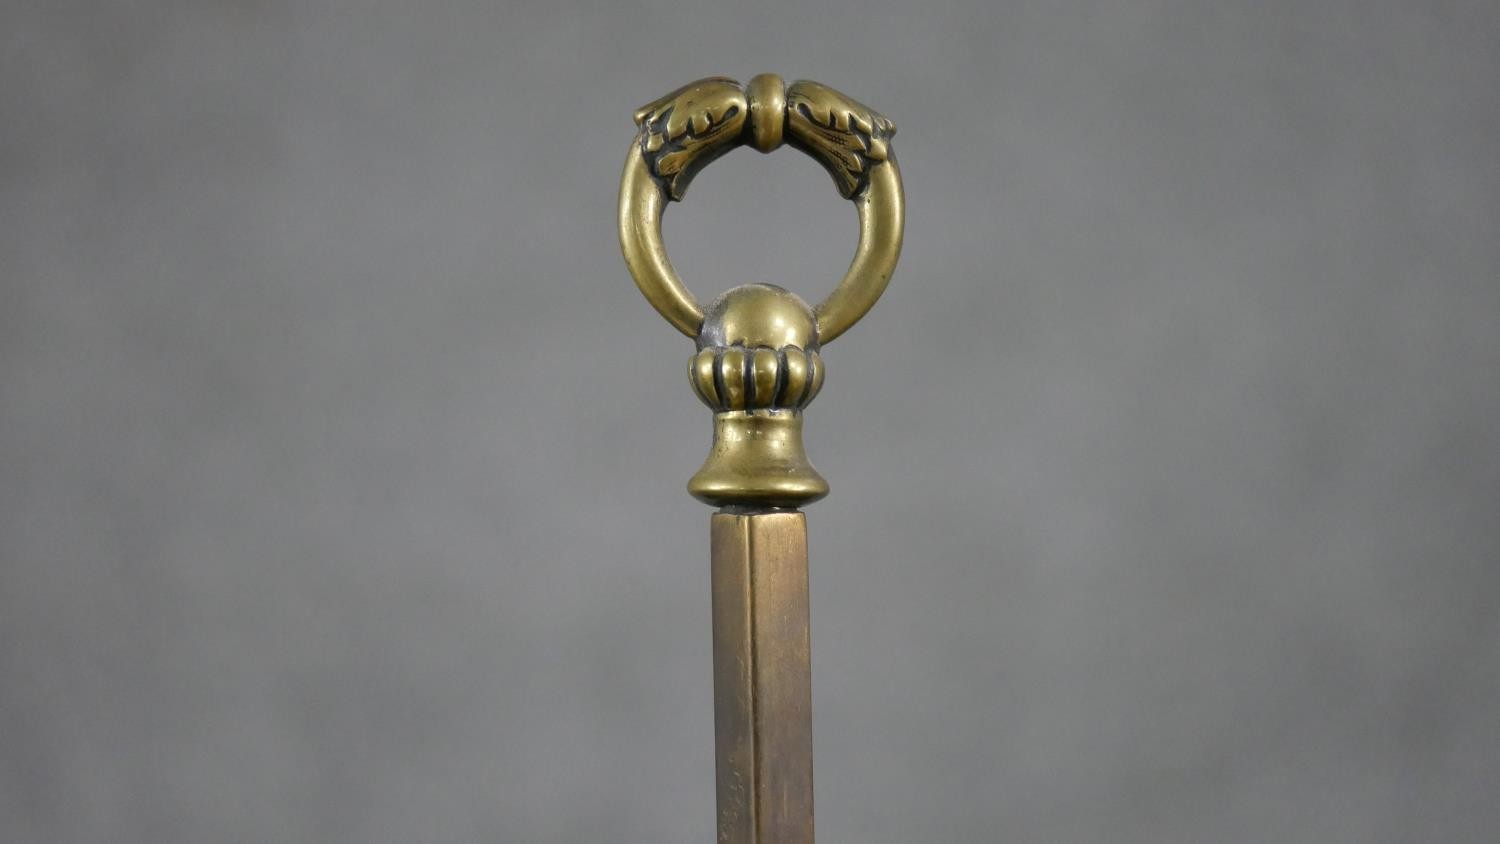 A 19th century brass double rise and fall student's candle lamp with scrolled arm supports. H.49 W. - Image 8 of 8